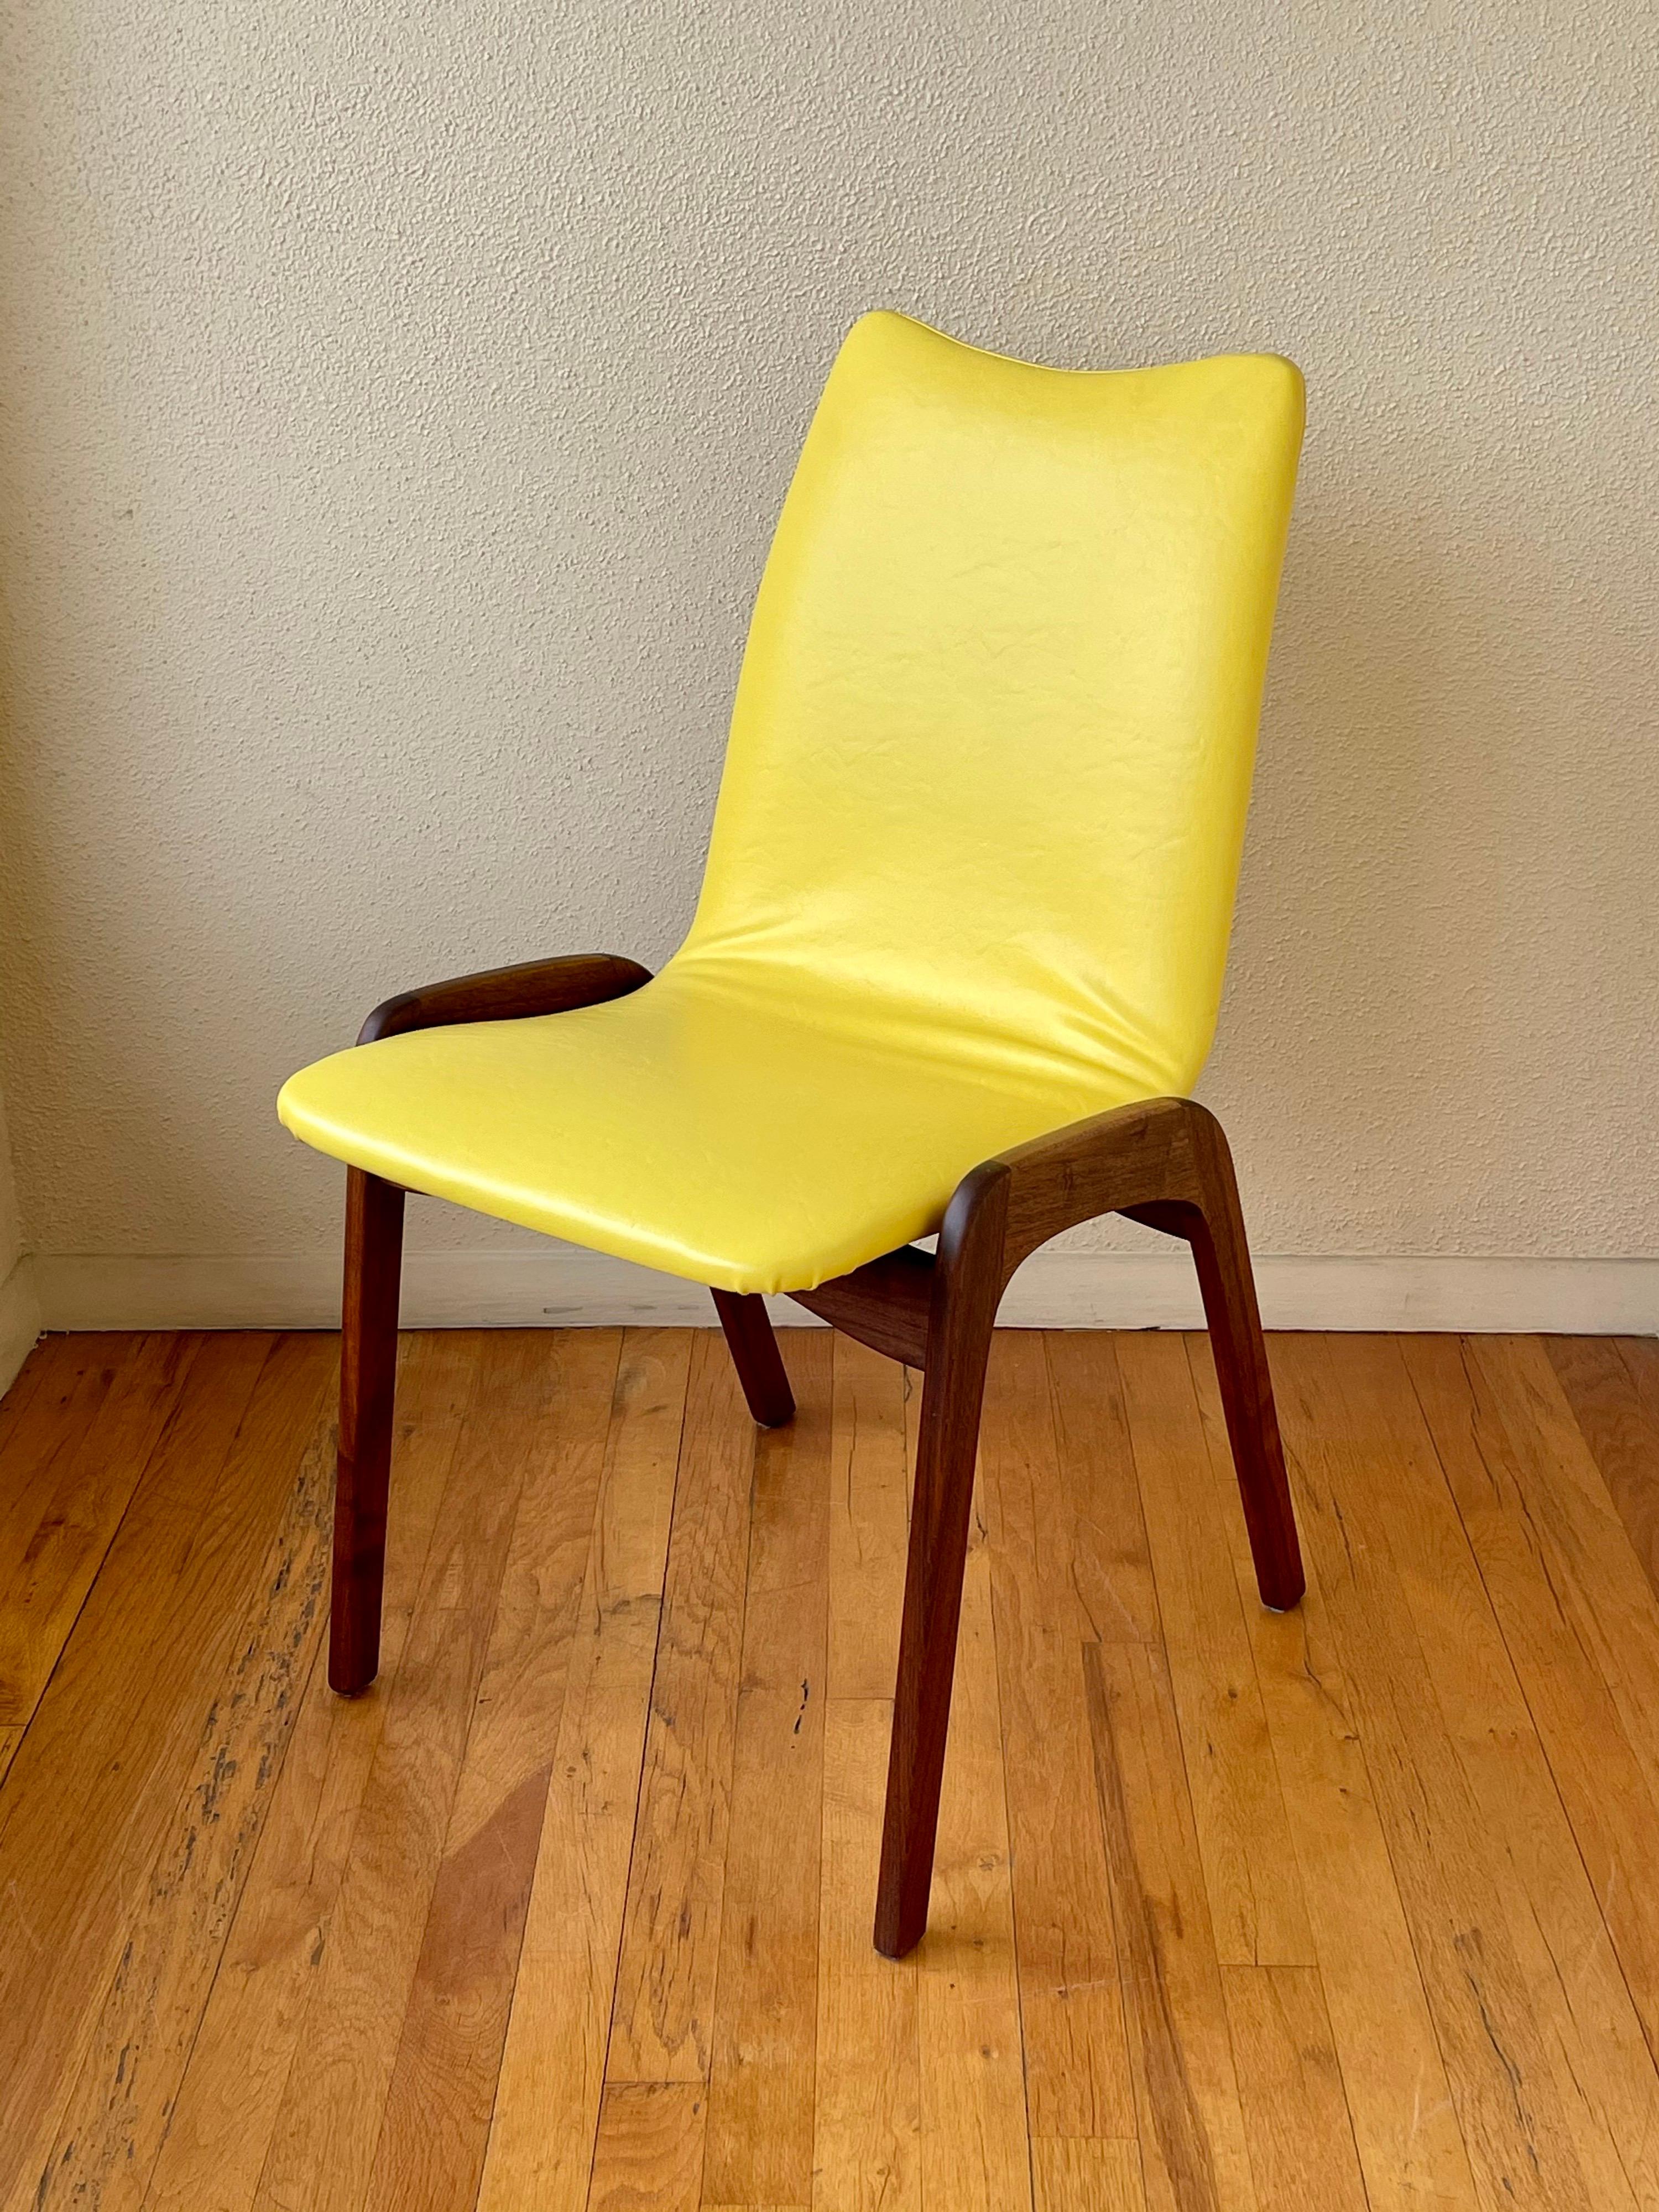 Cool pair of American Mid-Century Modern chairs by Chet Beardsley, circa 1970s awesome yellow original Naugahyde material solid walnut bases we have cleaned and refinished the bases these chairs, are solid and sturdy.